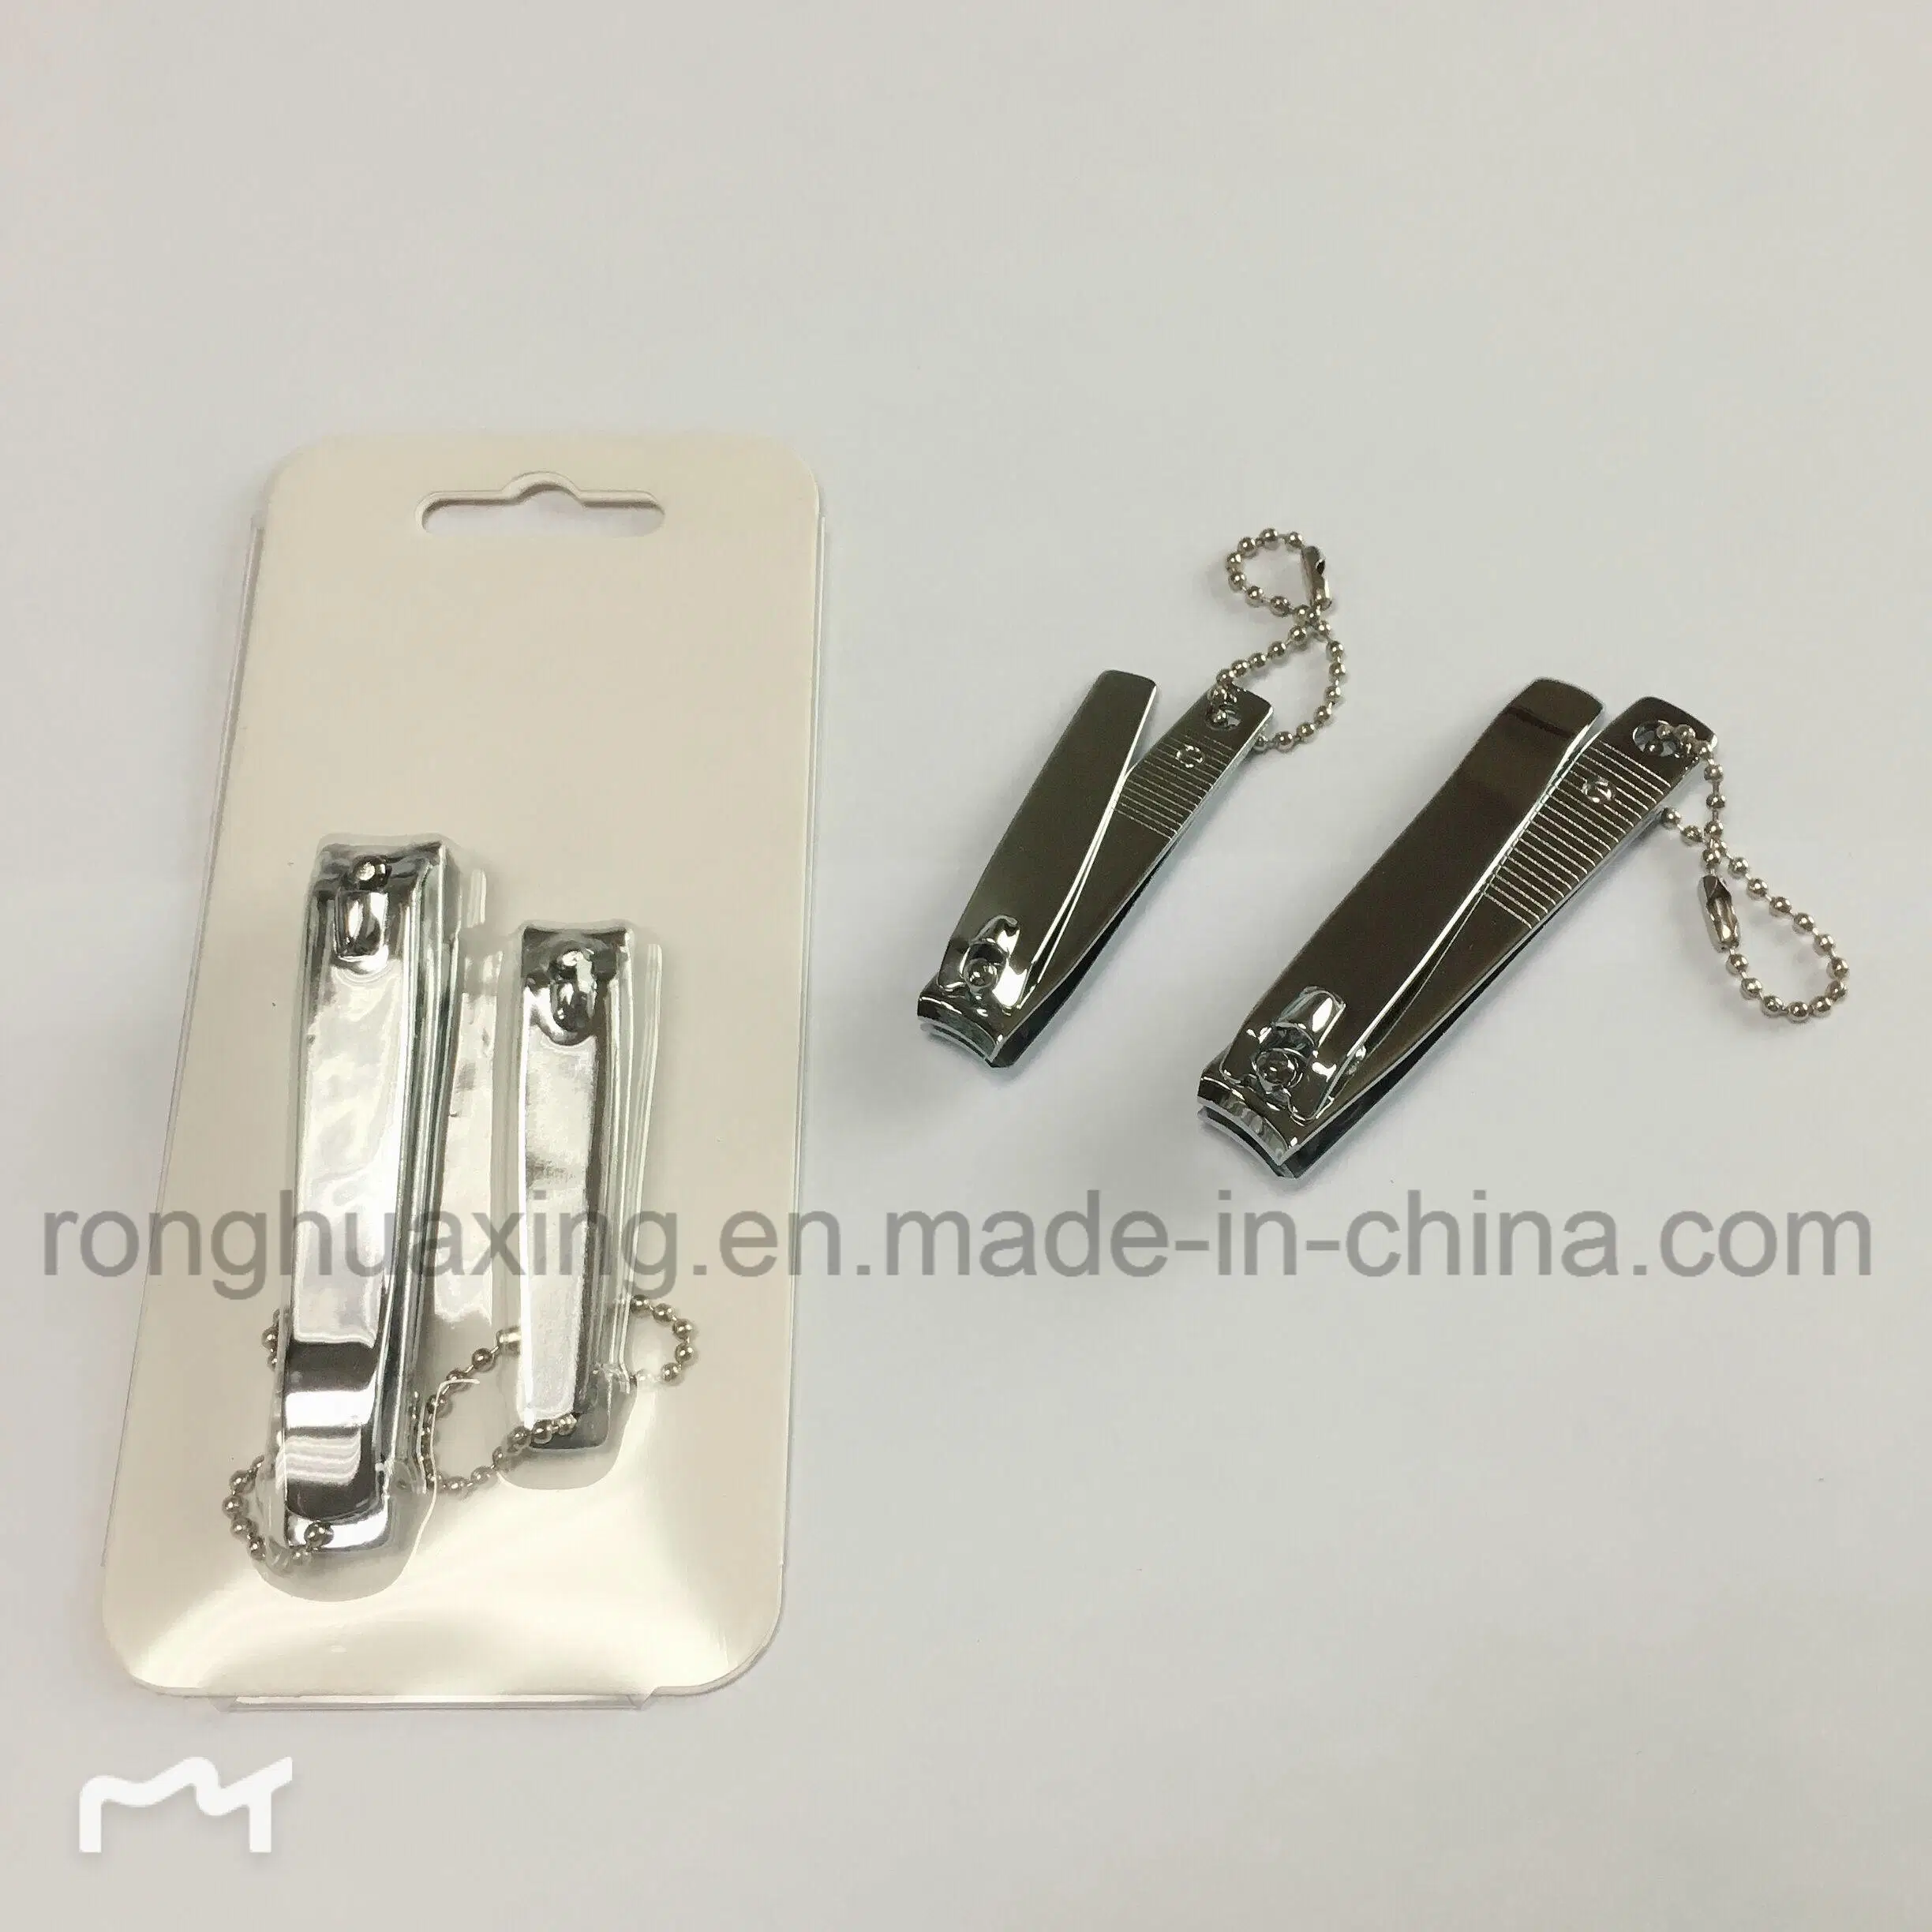 2PCS Men Nail Clipper Set with Insert Card Pack